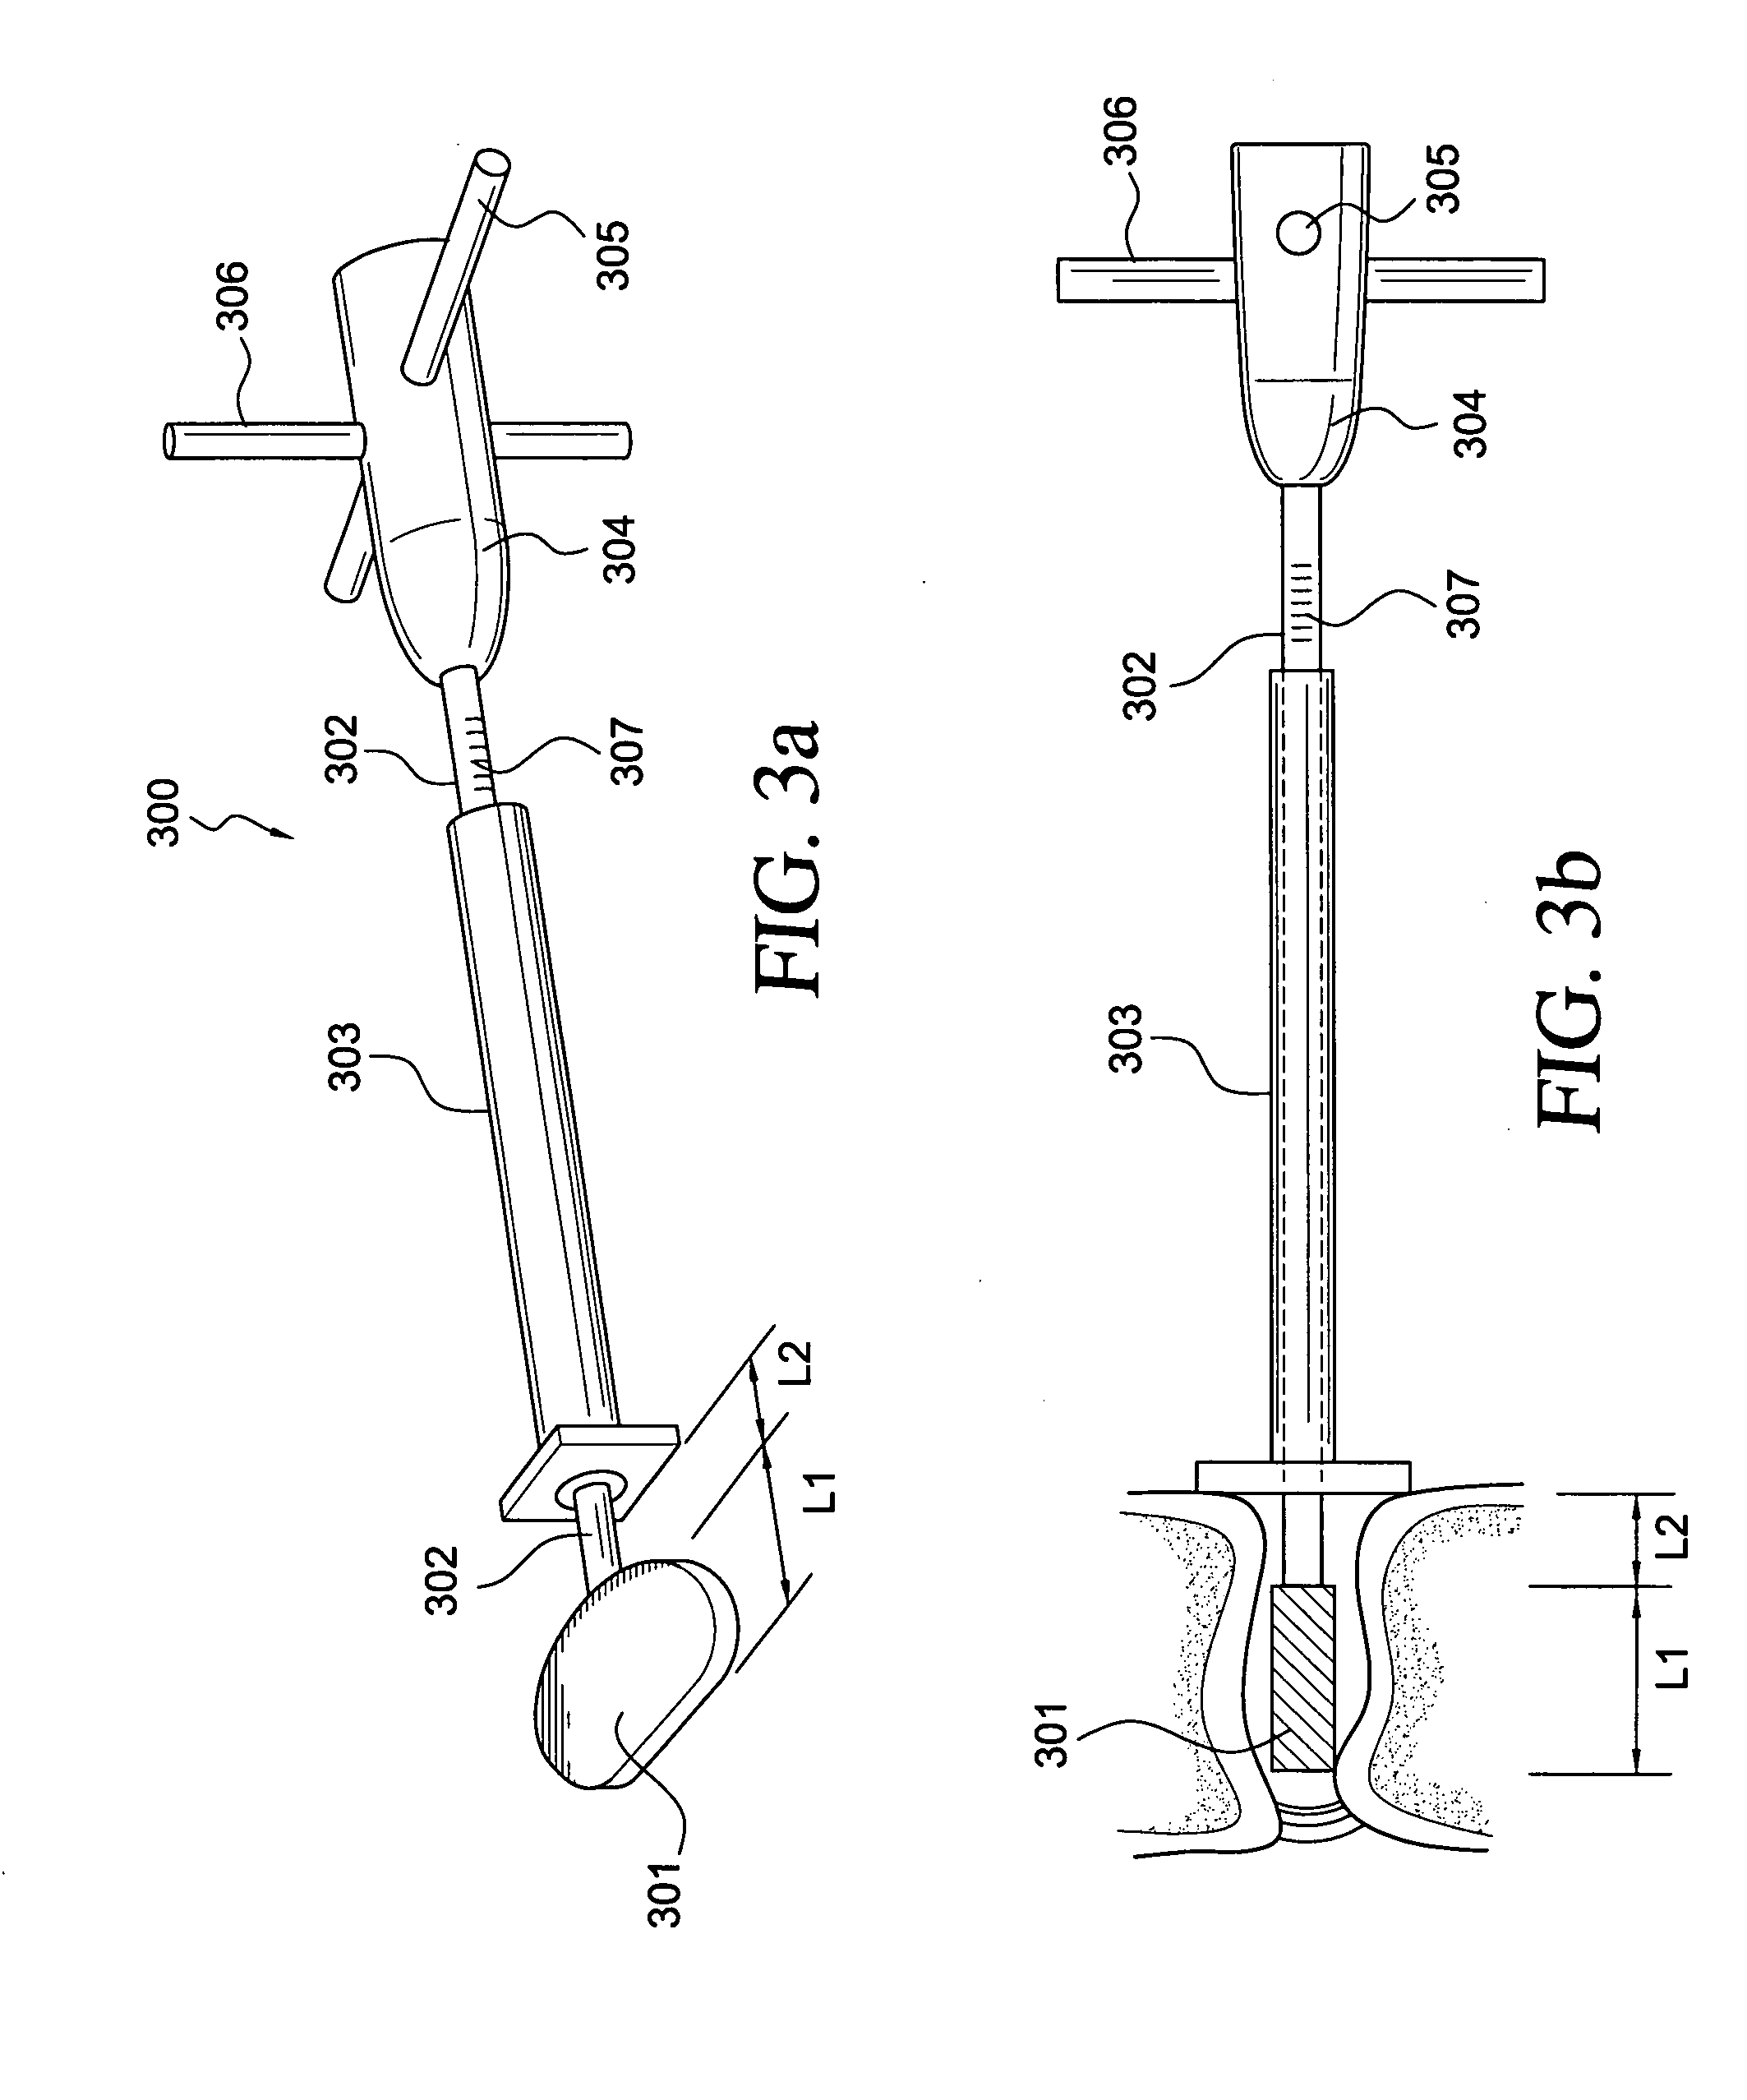 Intervertebral disc replacement and surgical instruments therefor